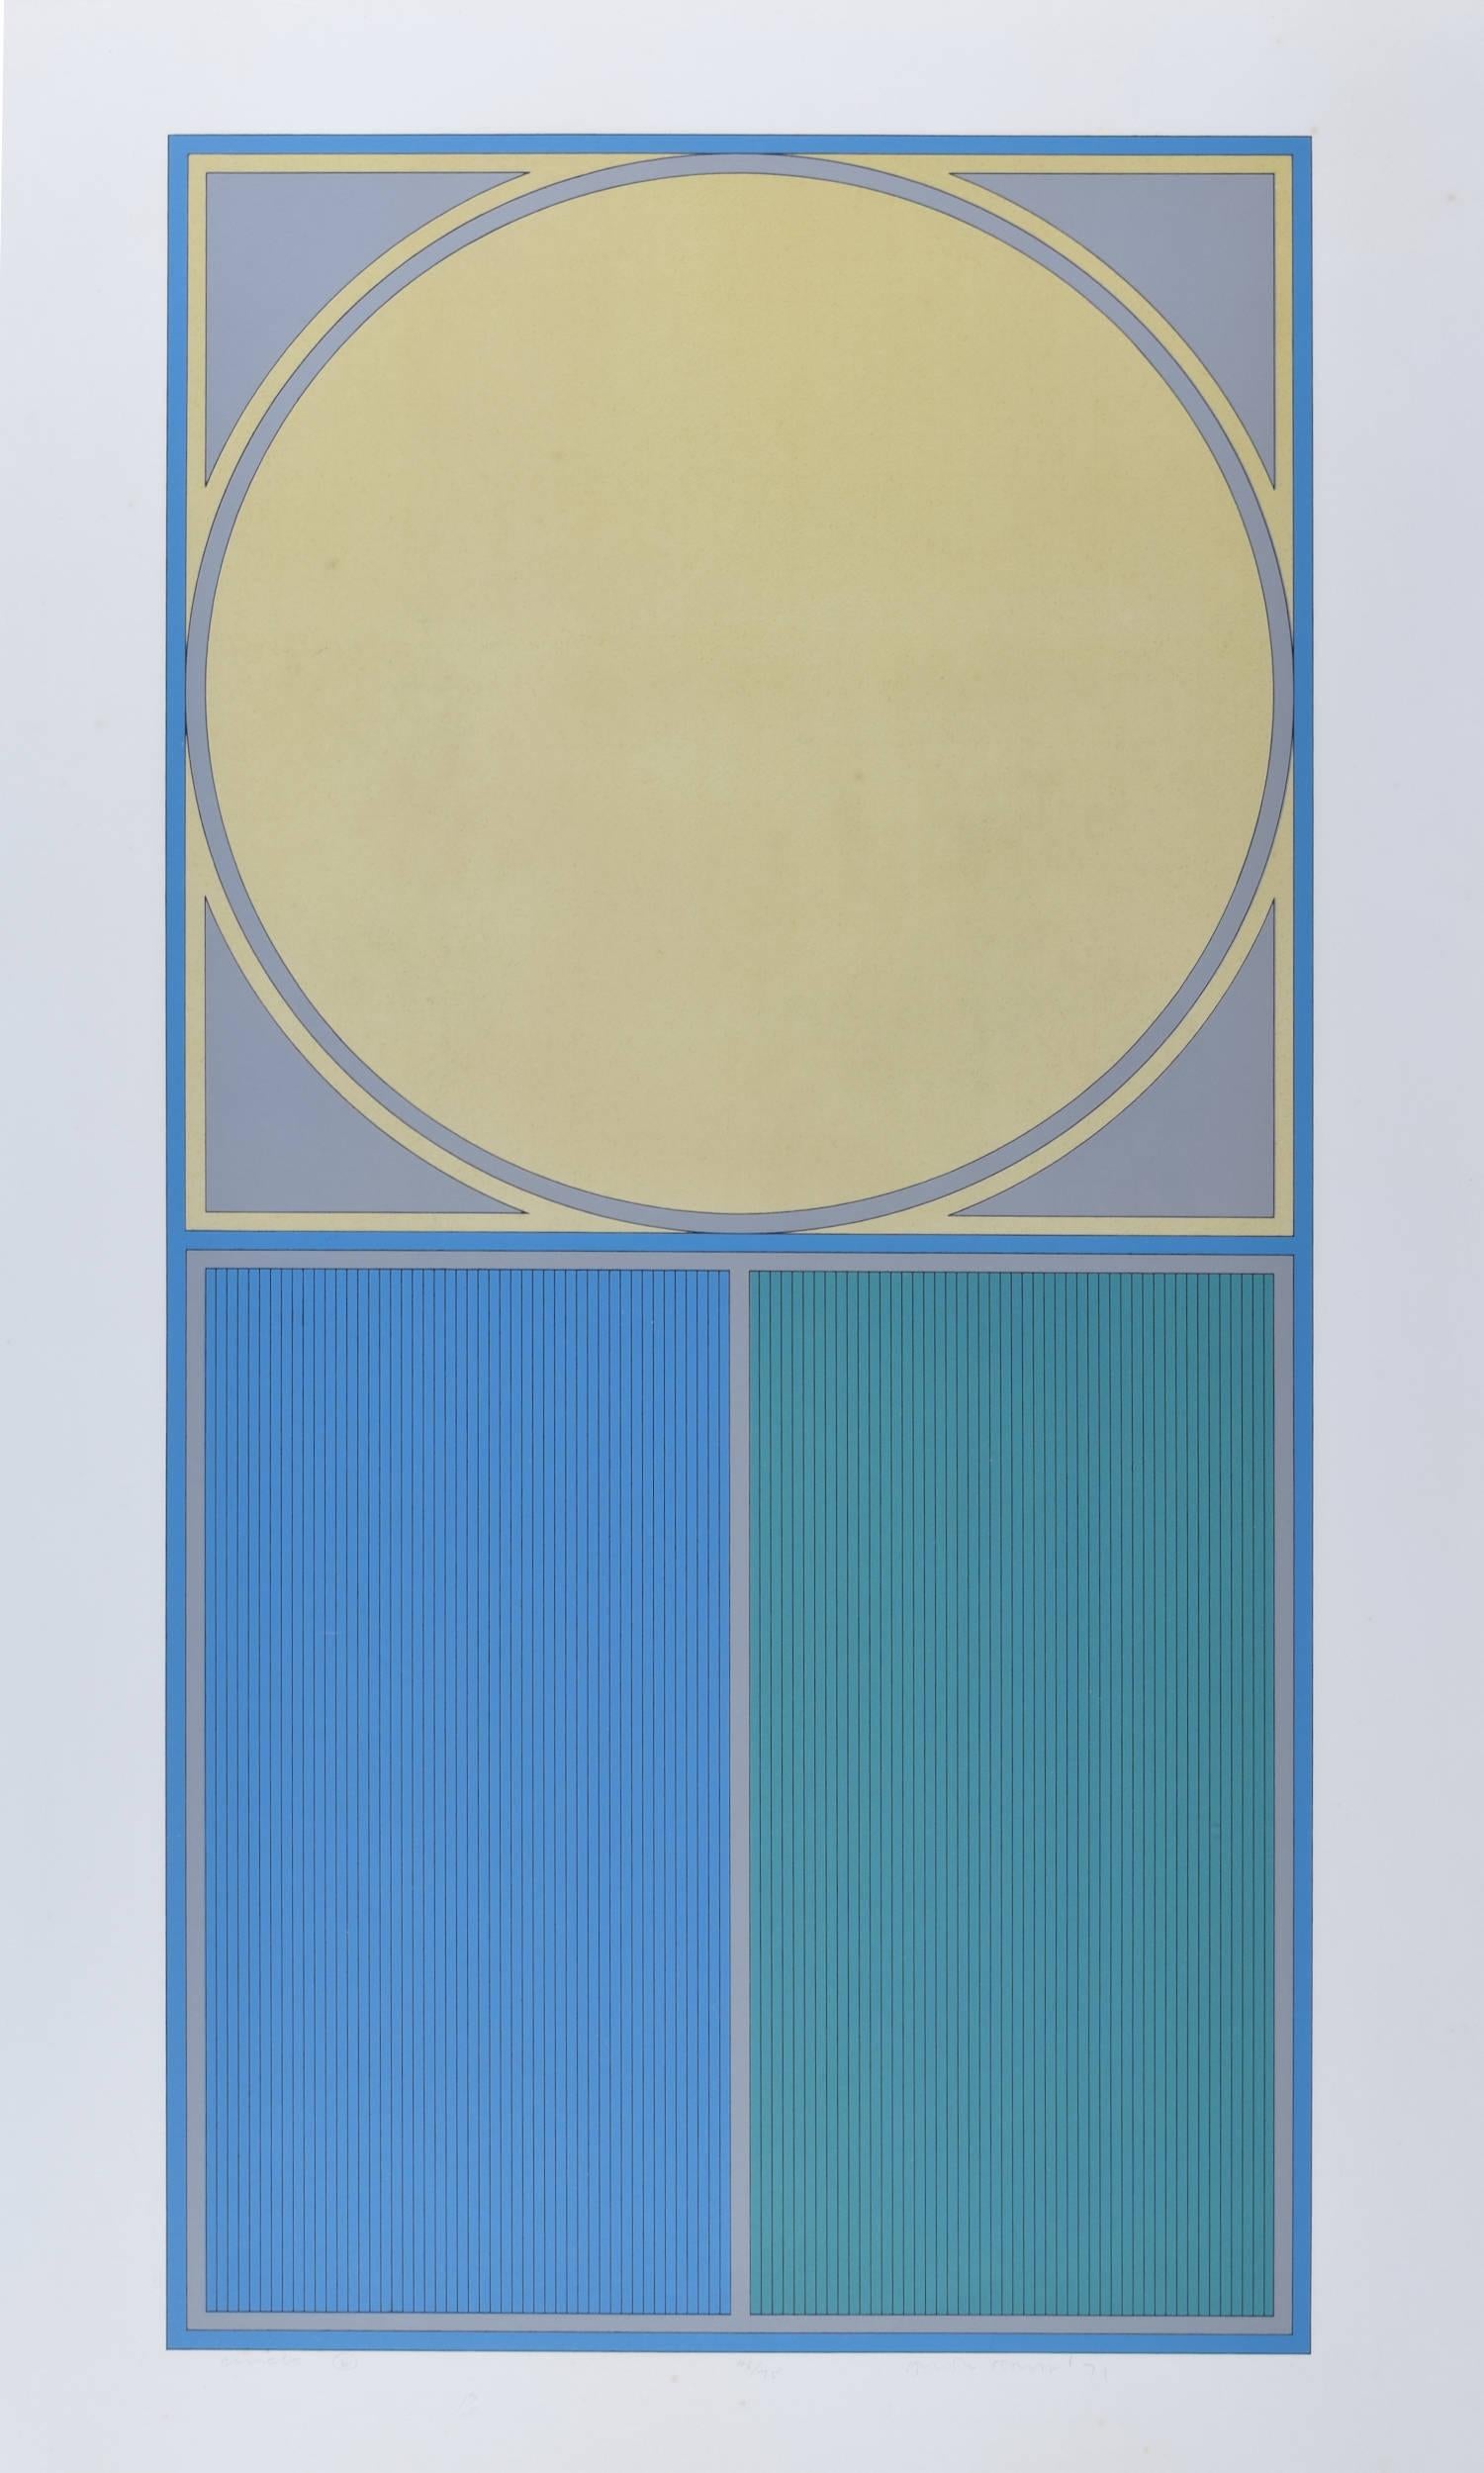 Circle E blue and yellow modern abstract lithograph by Gordon House